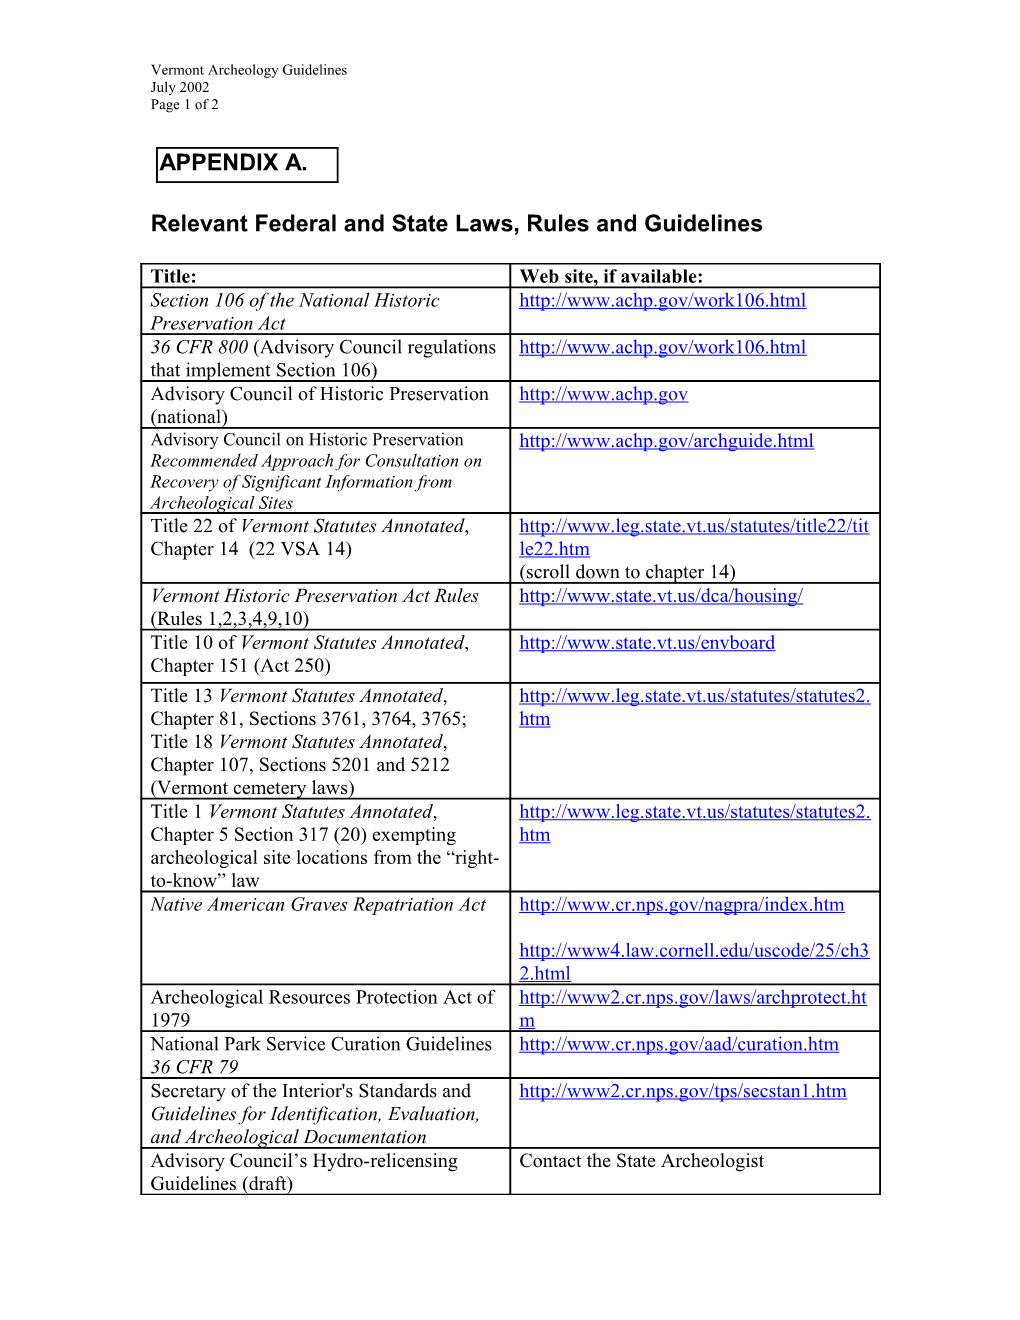 Relevant Federal and State Laws, Rules and Guidelines